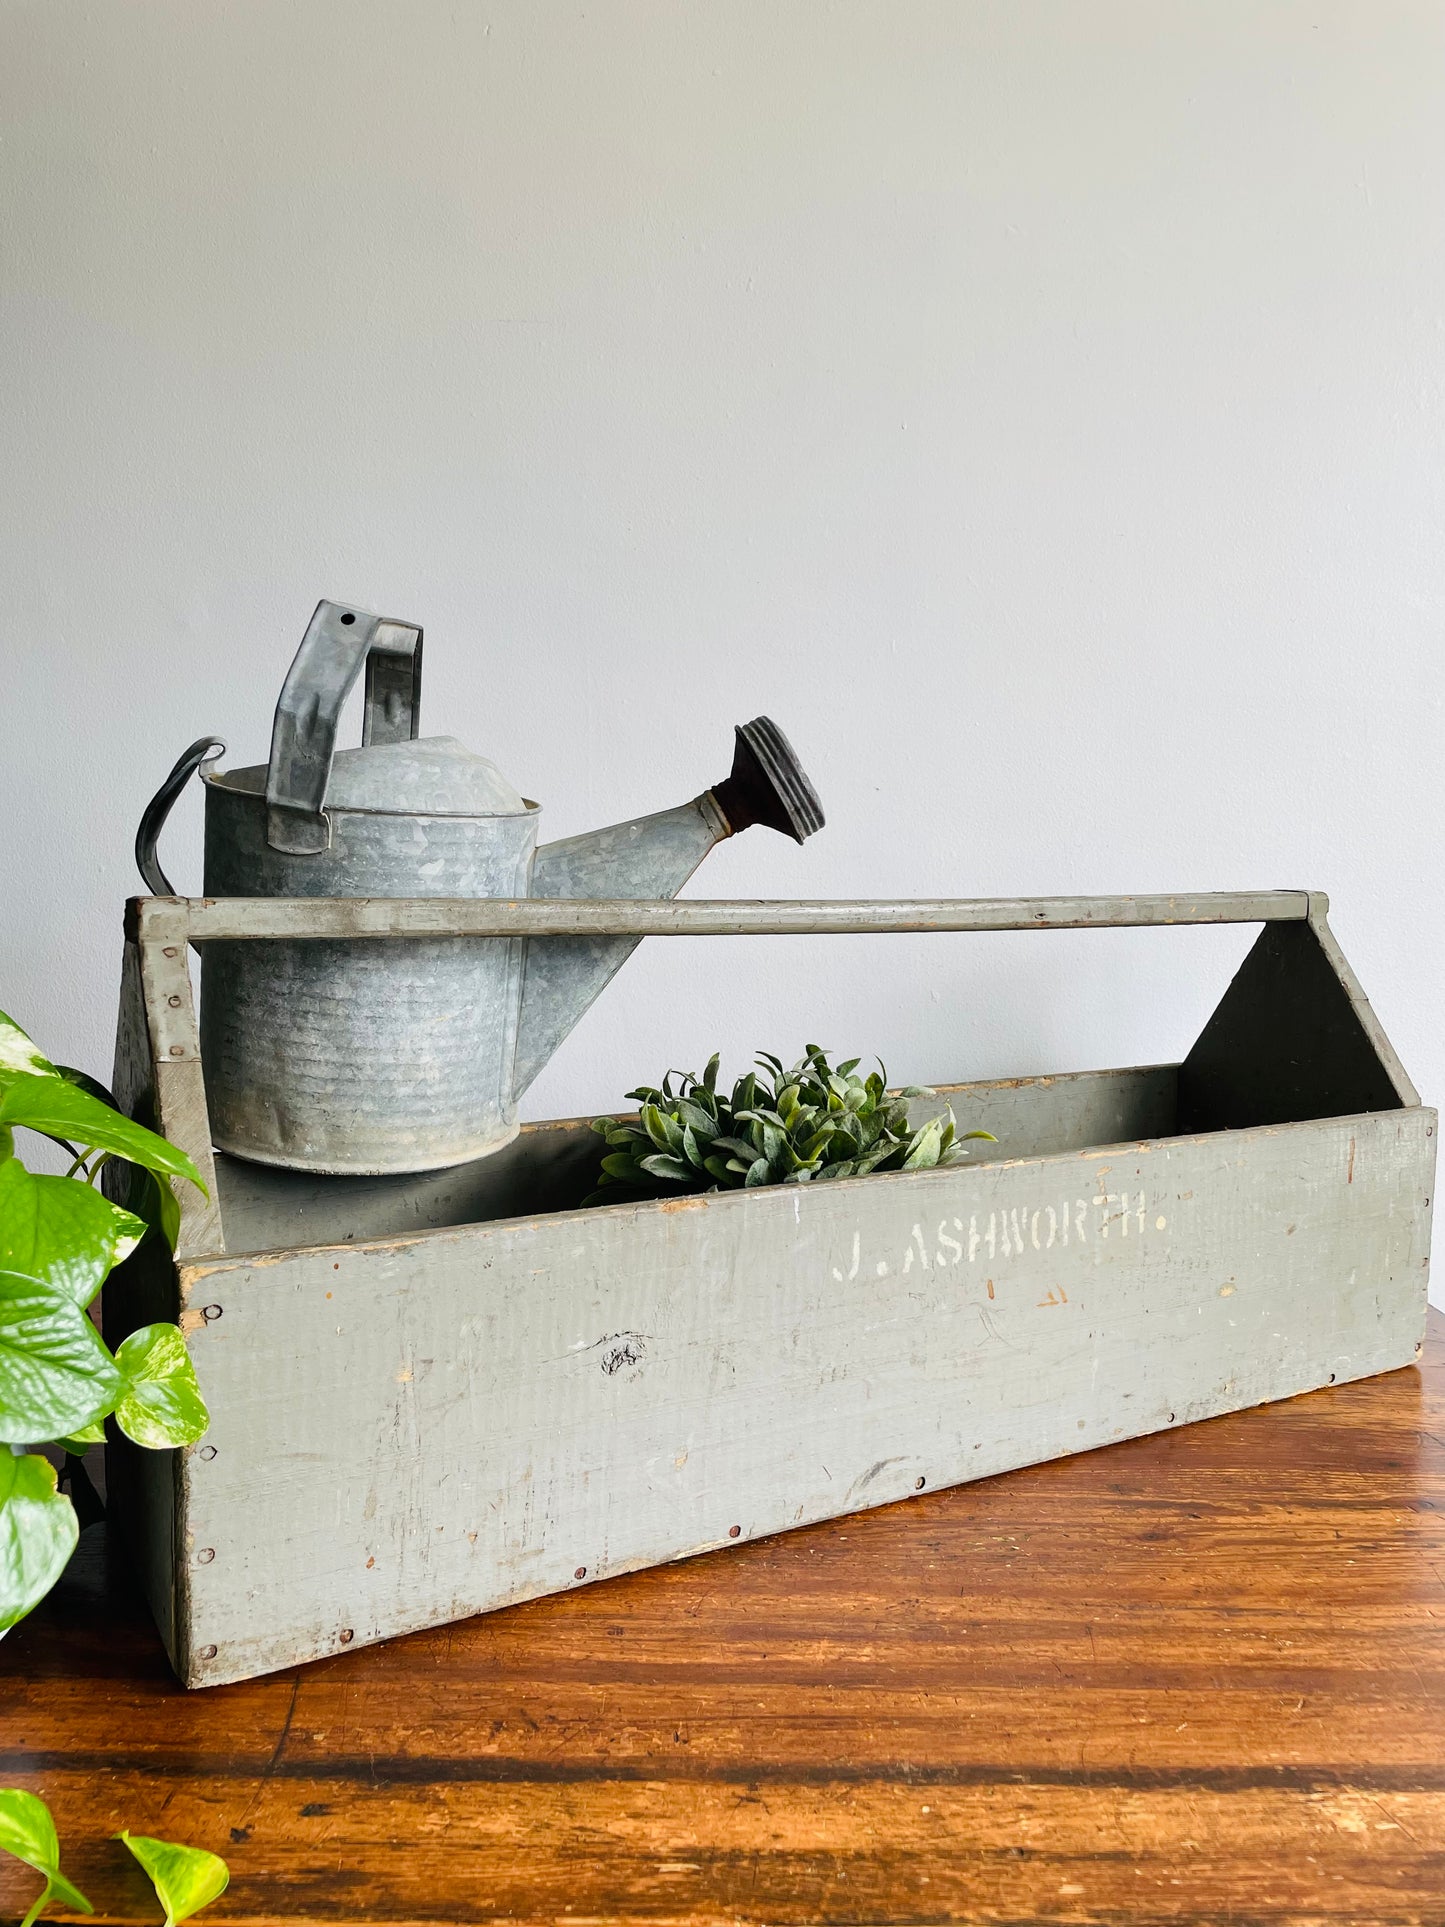 Giant Grey Wood Toolbox with Metal Supports on Handle - Stamped J. Ashworth - Makes a Beautiful Planter Box!